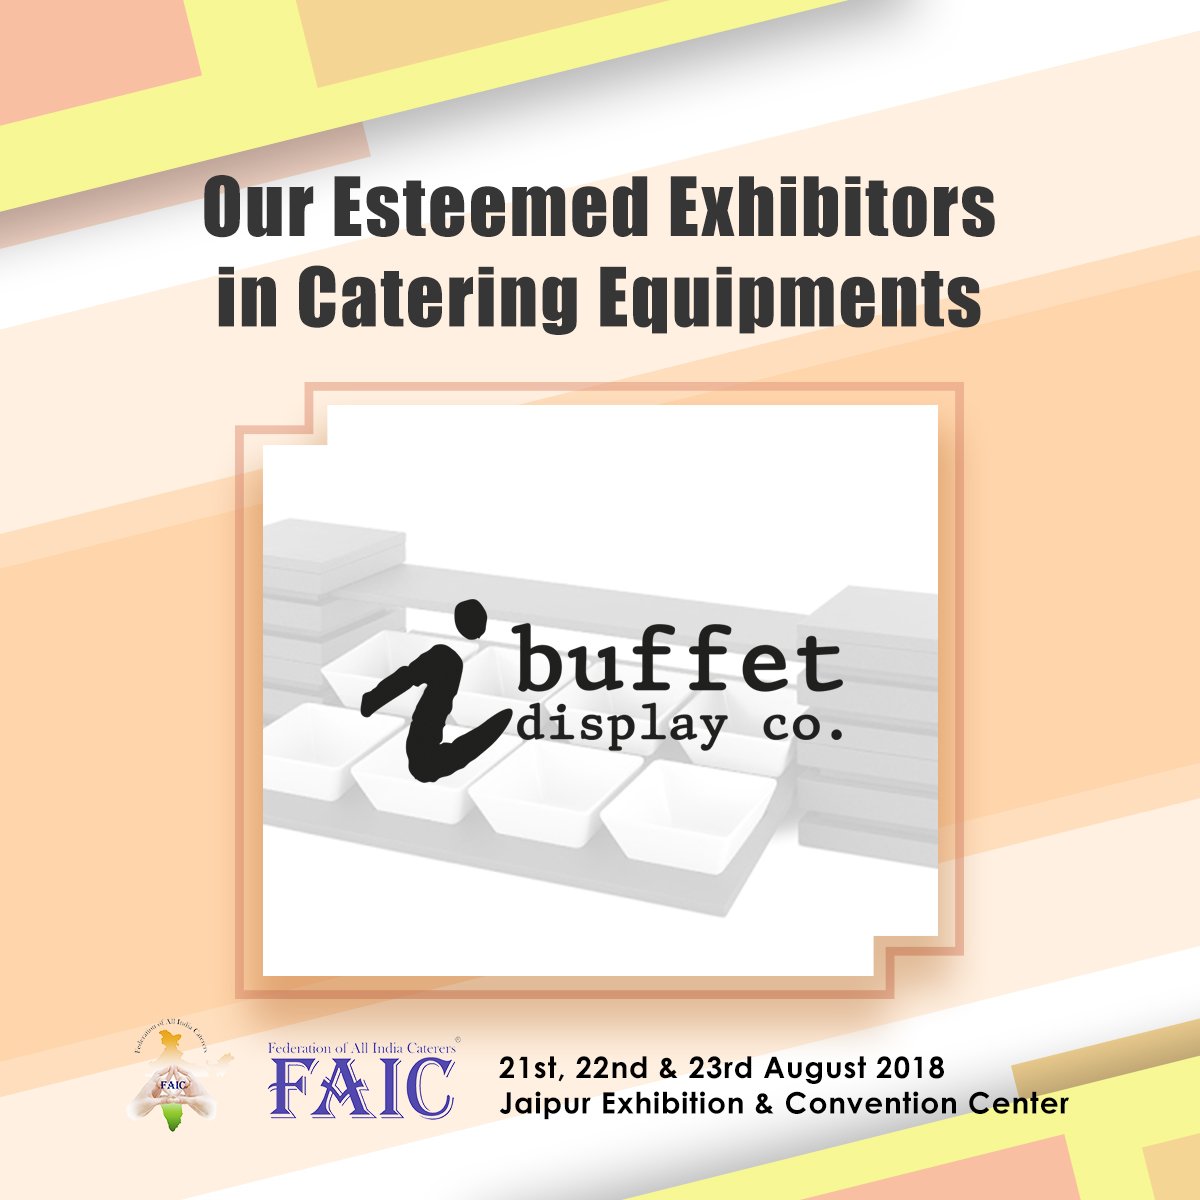 Our esteemed exhibitors in Catering Equipments
 #food #cateringequipments #kitchen #foody #FAICIndia #foodandbeverages #foodcatering #cateringexhibition #foodevent #catererlife #cateringevent #foodbusinessnetworking #startupindia #foodexhibition #catering #convesation #restaurant